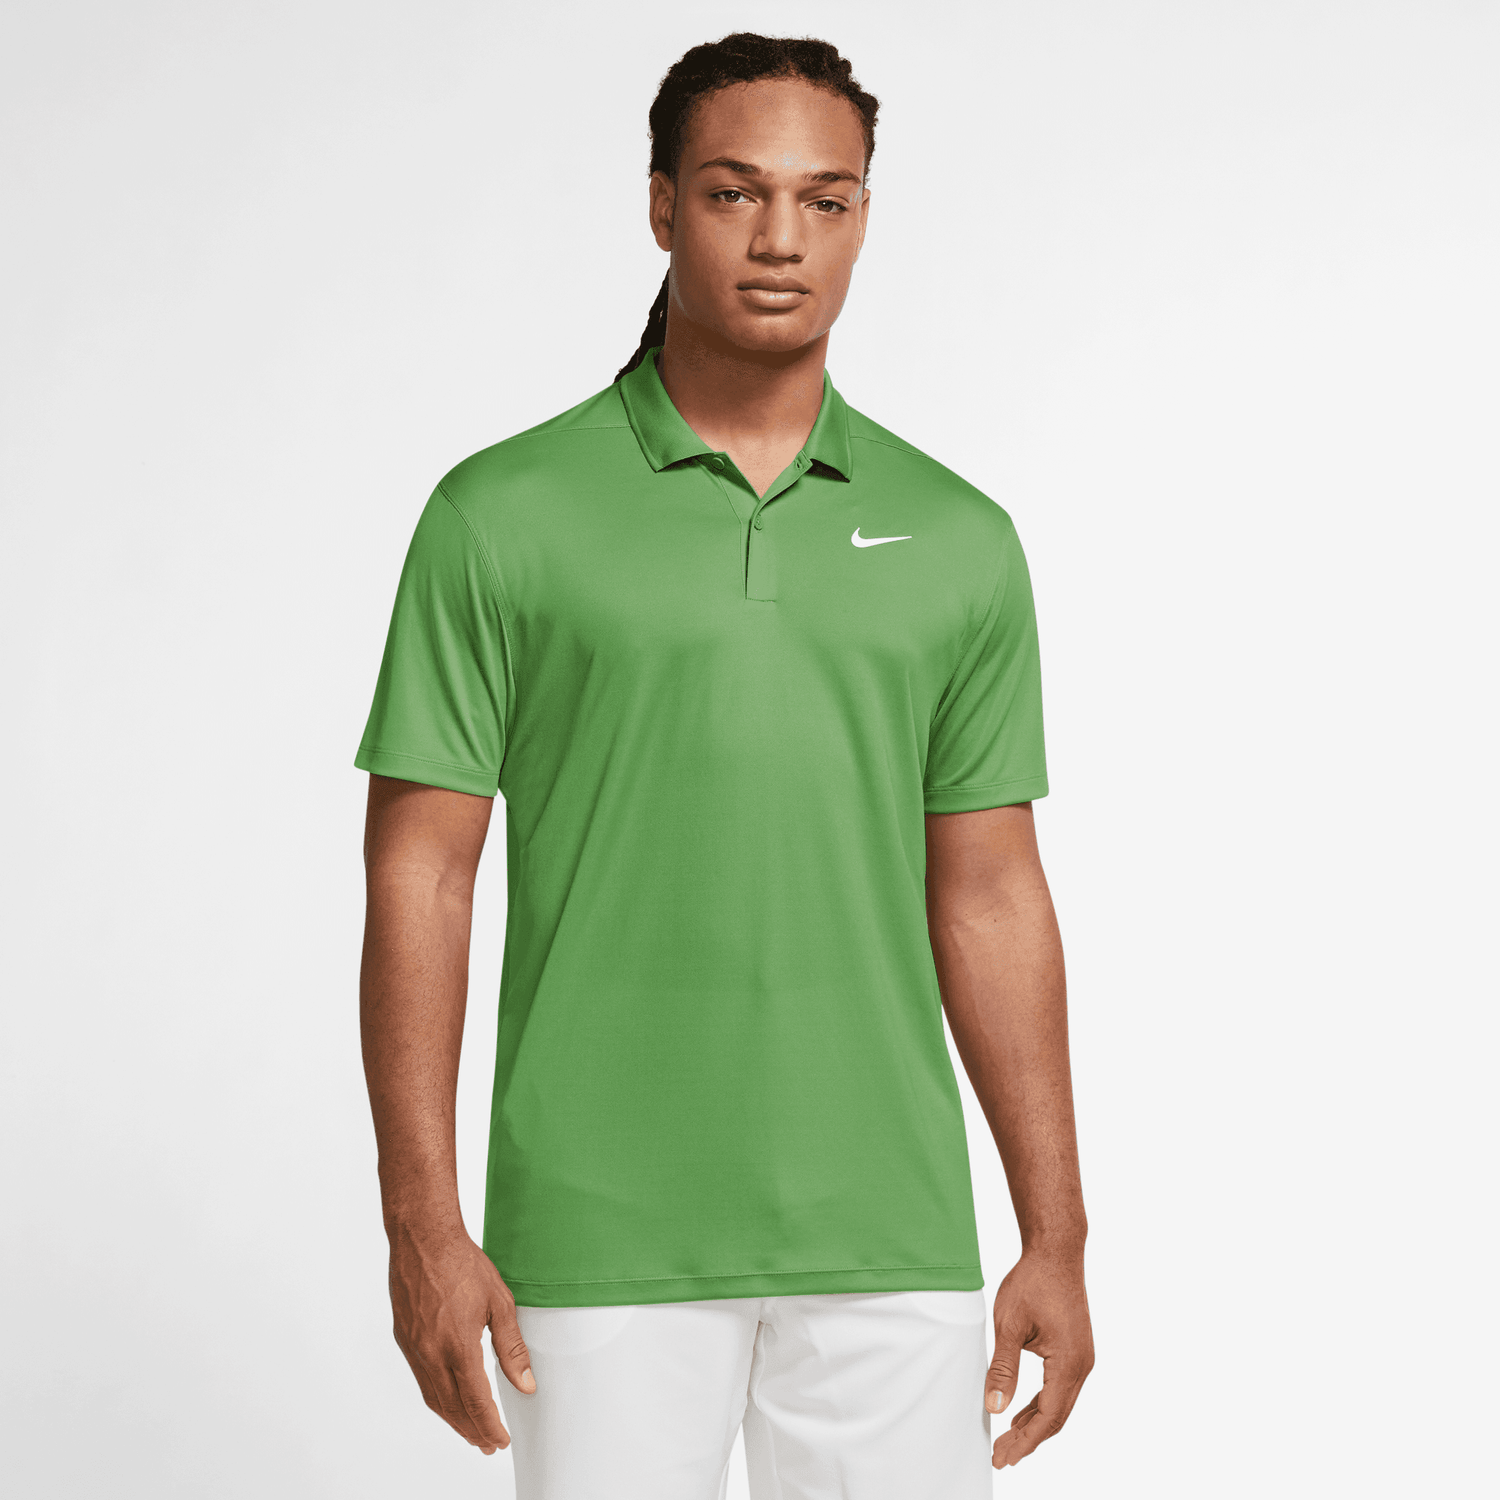 Nike Golf Dri-FIT Victory Solid Polo Shirt DH0822 - 350 Chlorophyll / White 350 M 